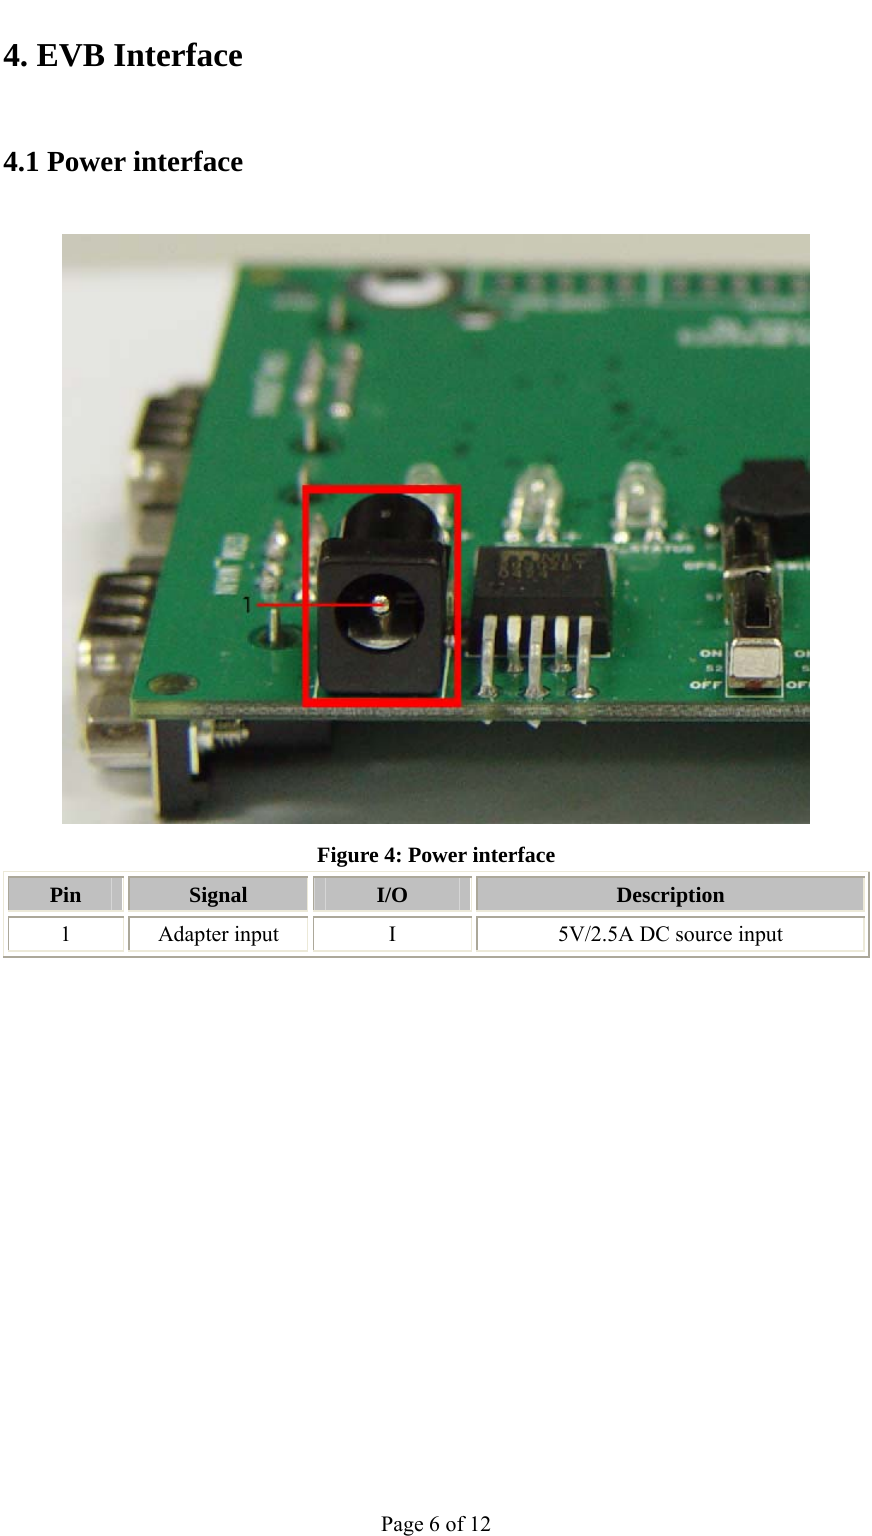                                           4. EVB Interface 4.1 Power interface  Figure 4: Power interface Pin  Signal  I/O  Description 1 Adapter input  I 5V/2.5A DC source input Page 6 of 12 